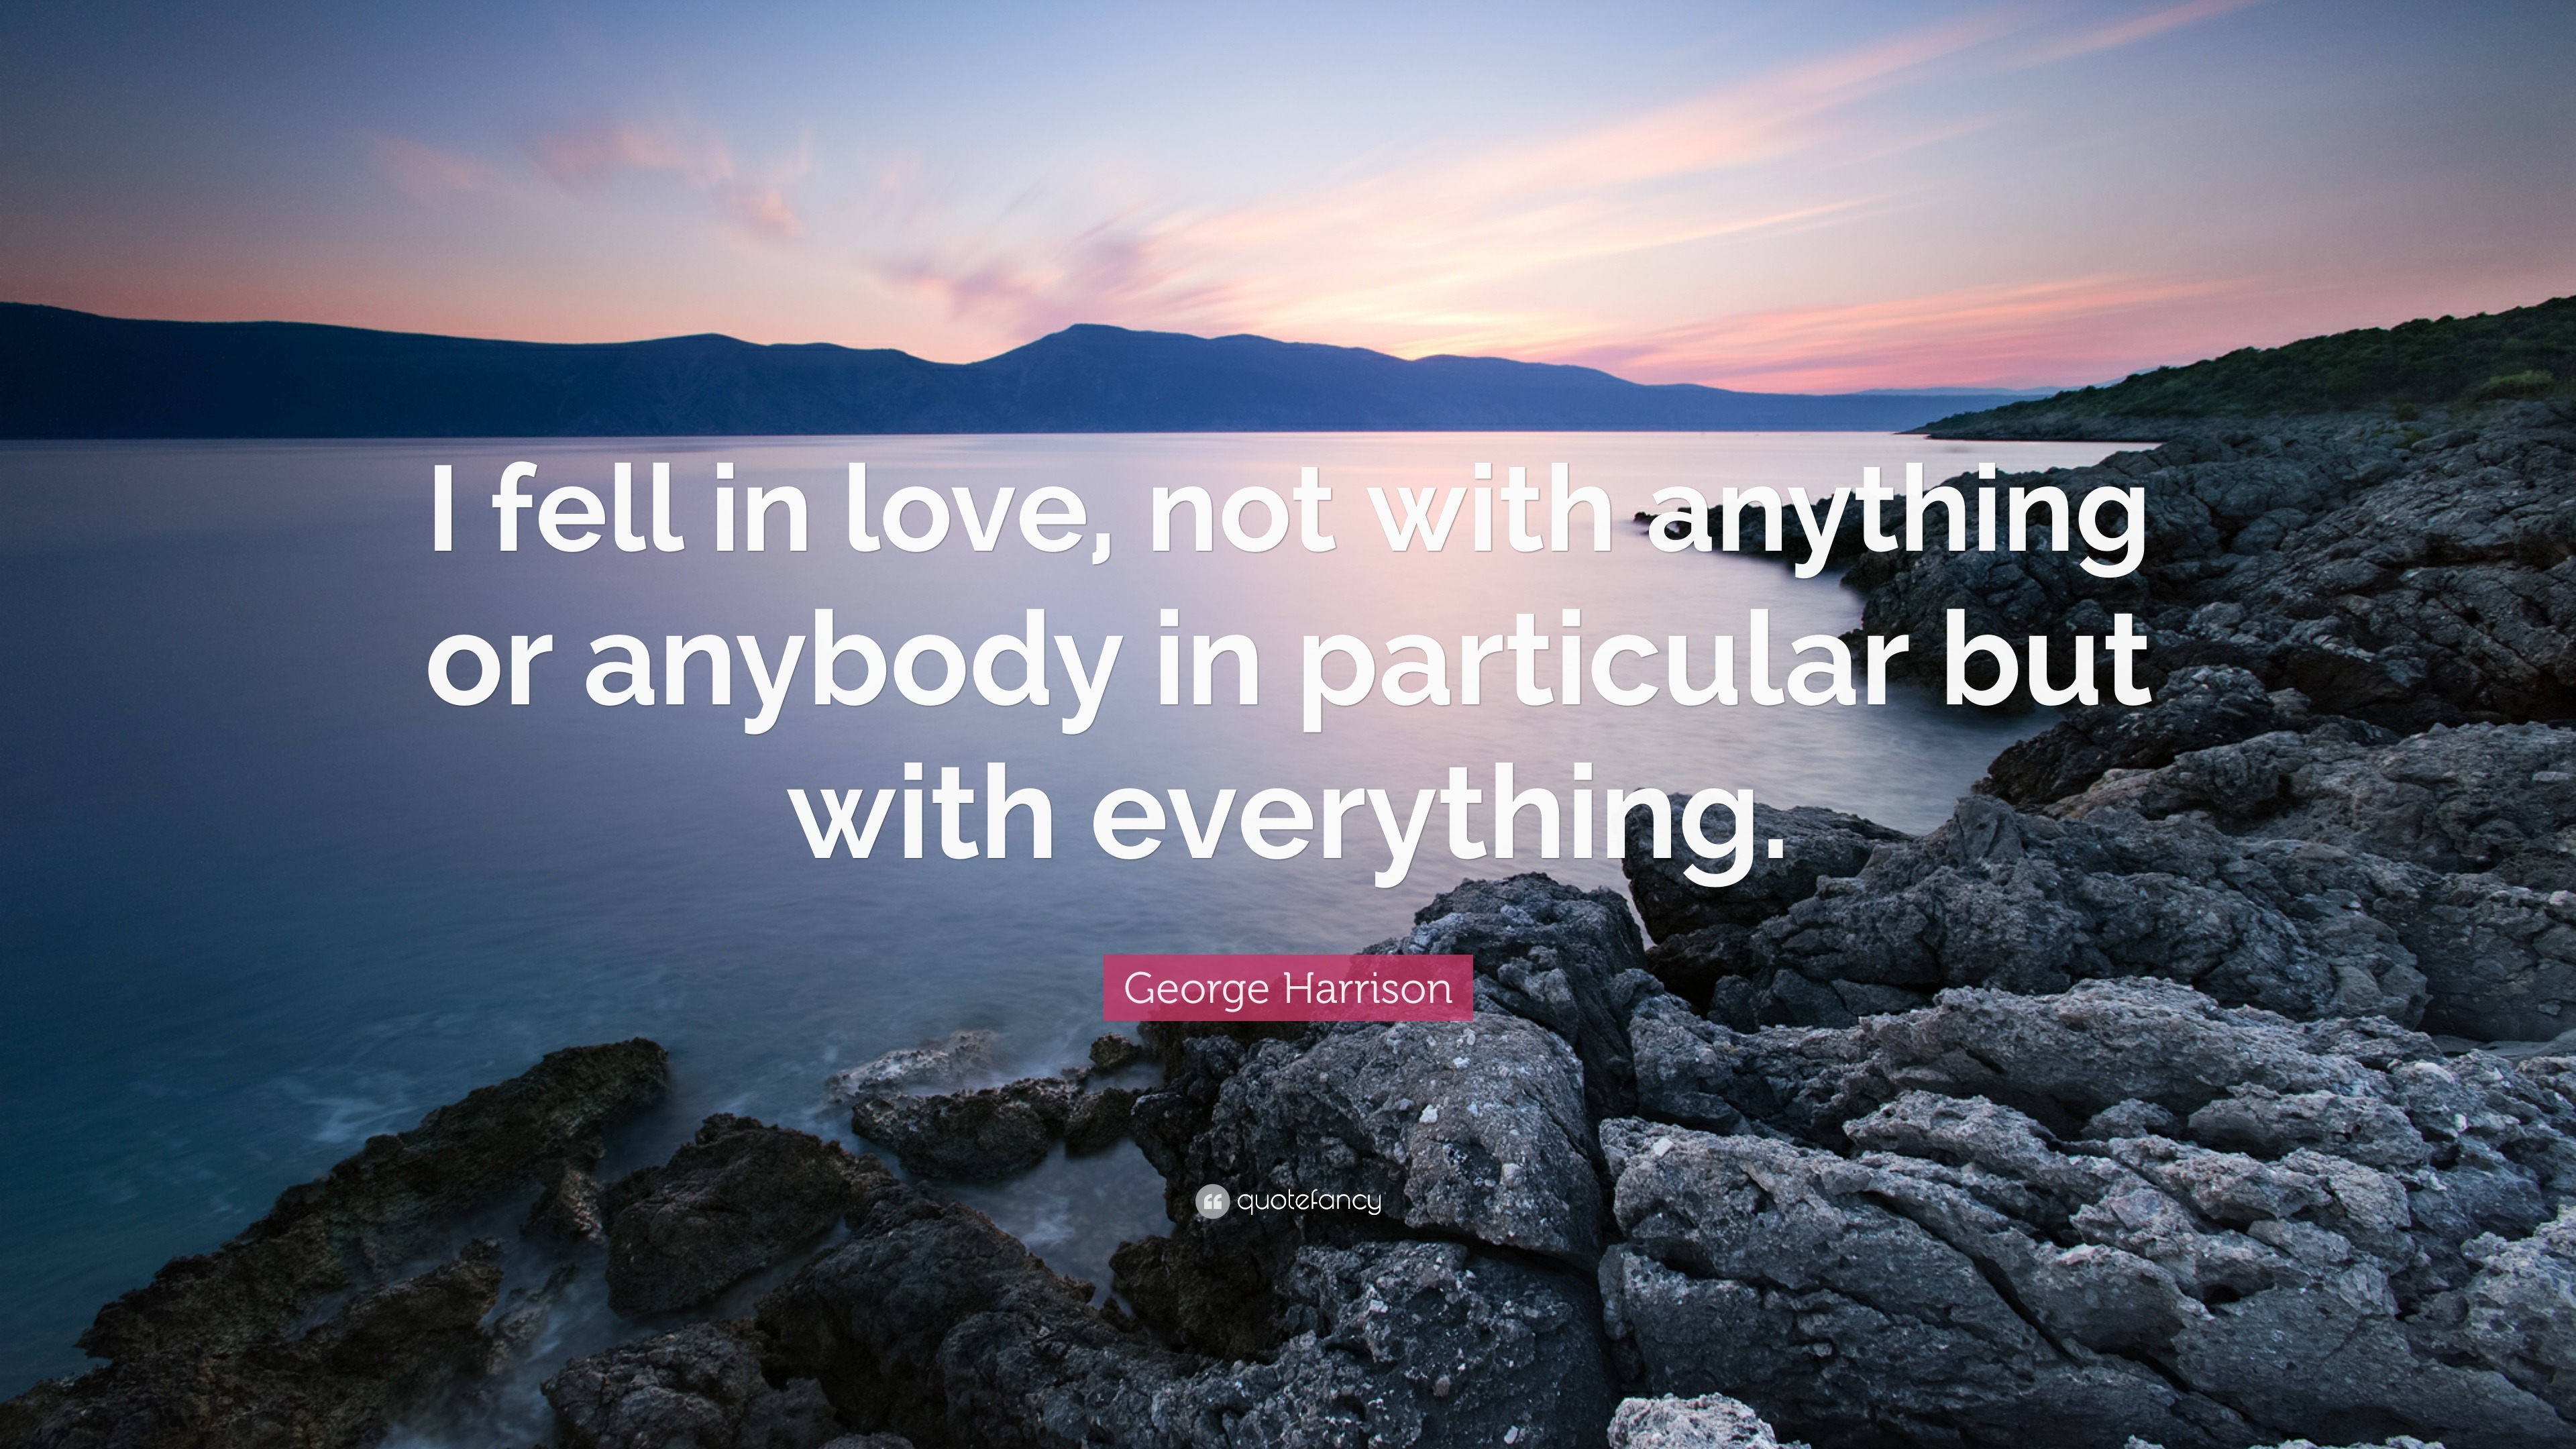 George Harrison Quote: “I fell in love, not with anything or anybody in ...